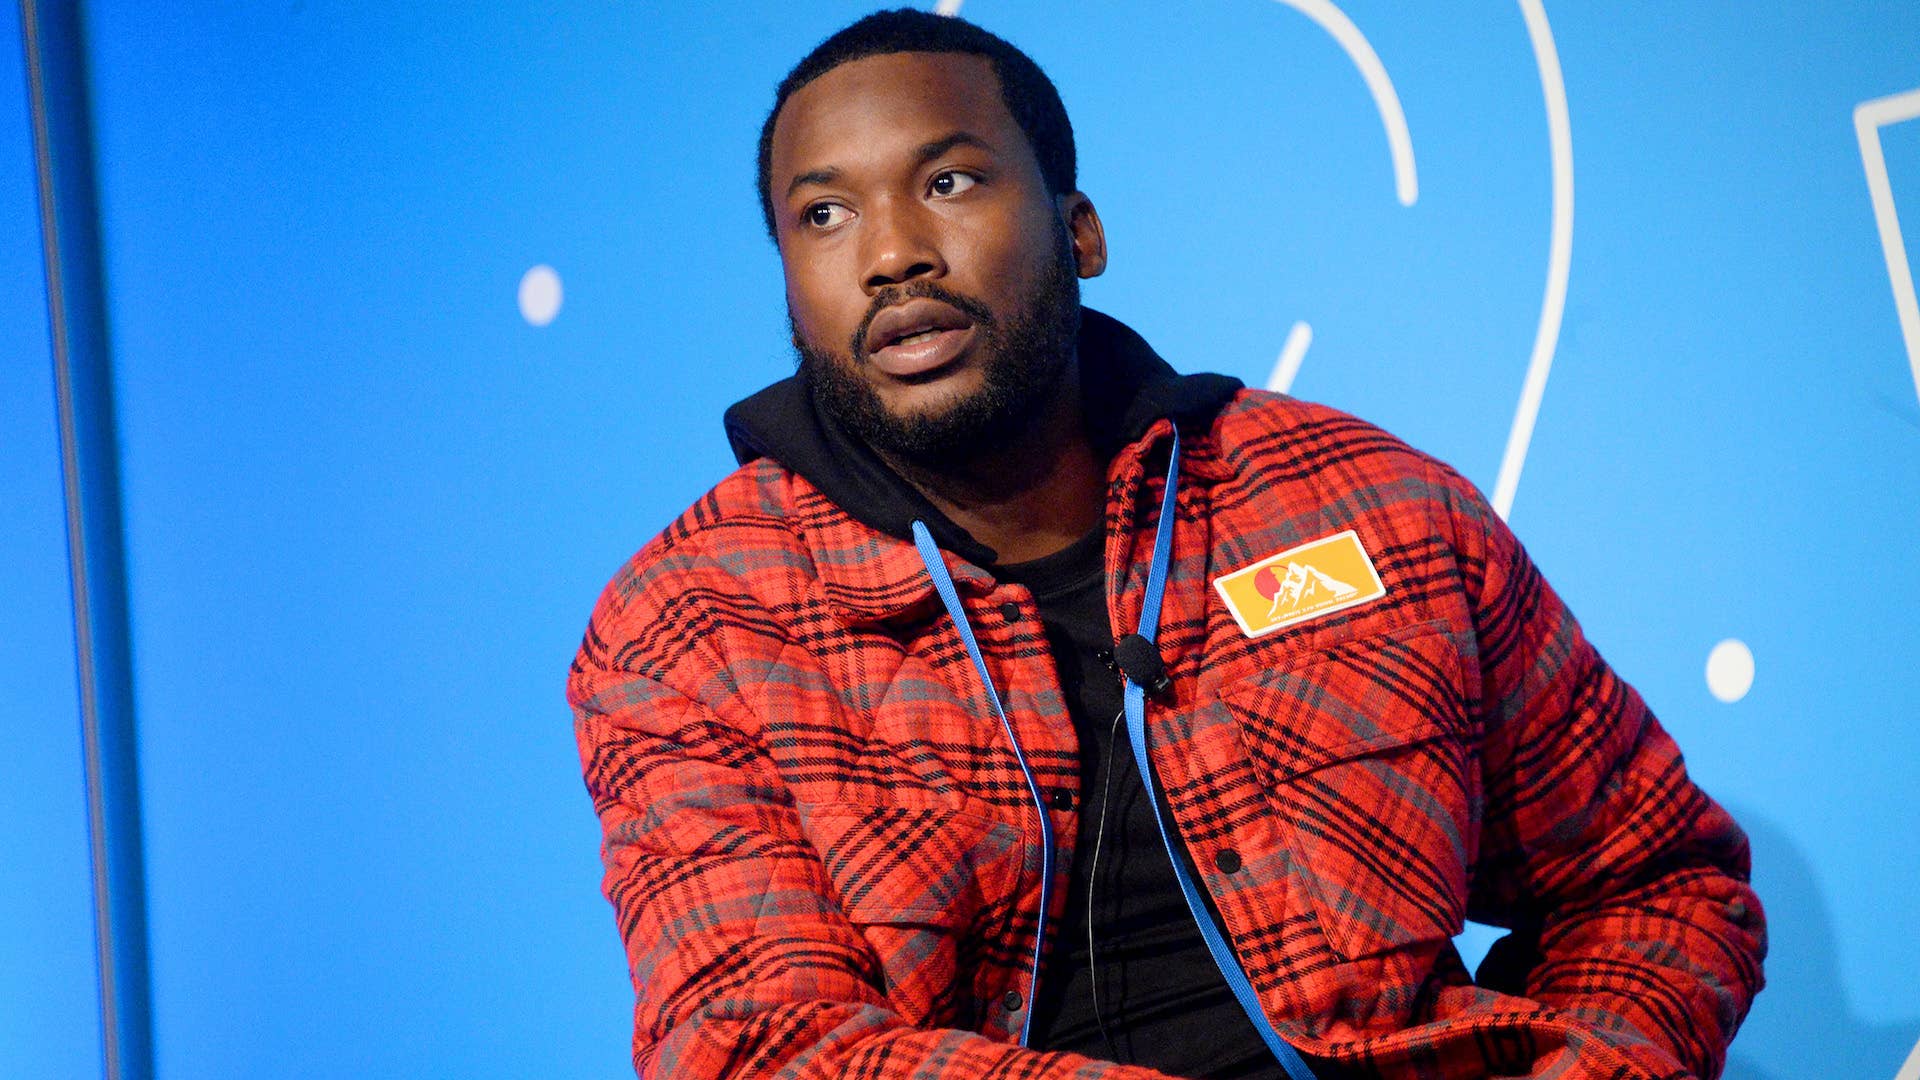 Meek Mill speaks on stage at the "Justice for All: Reforming a Broken System."